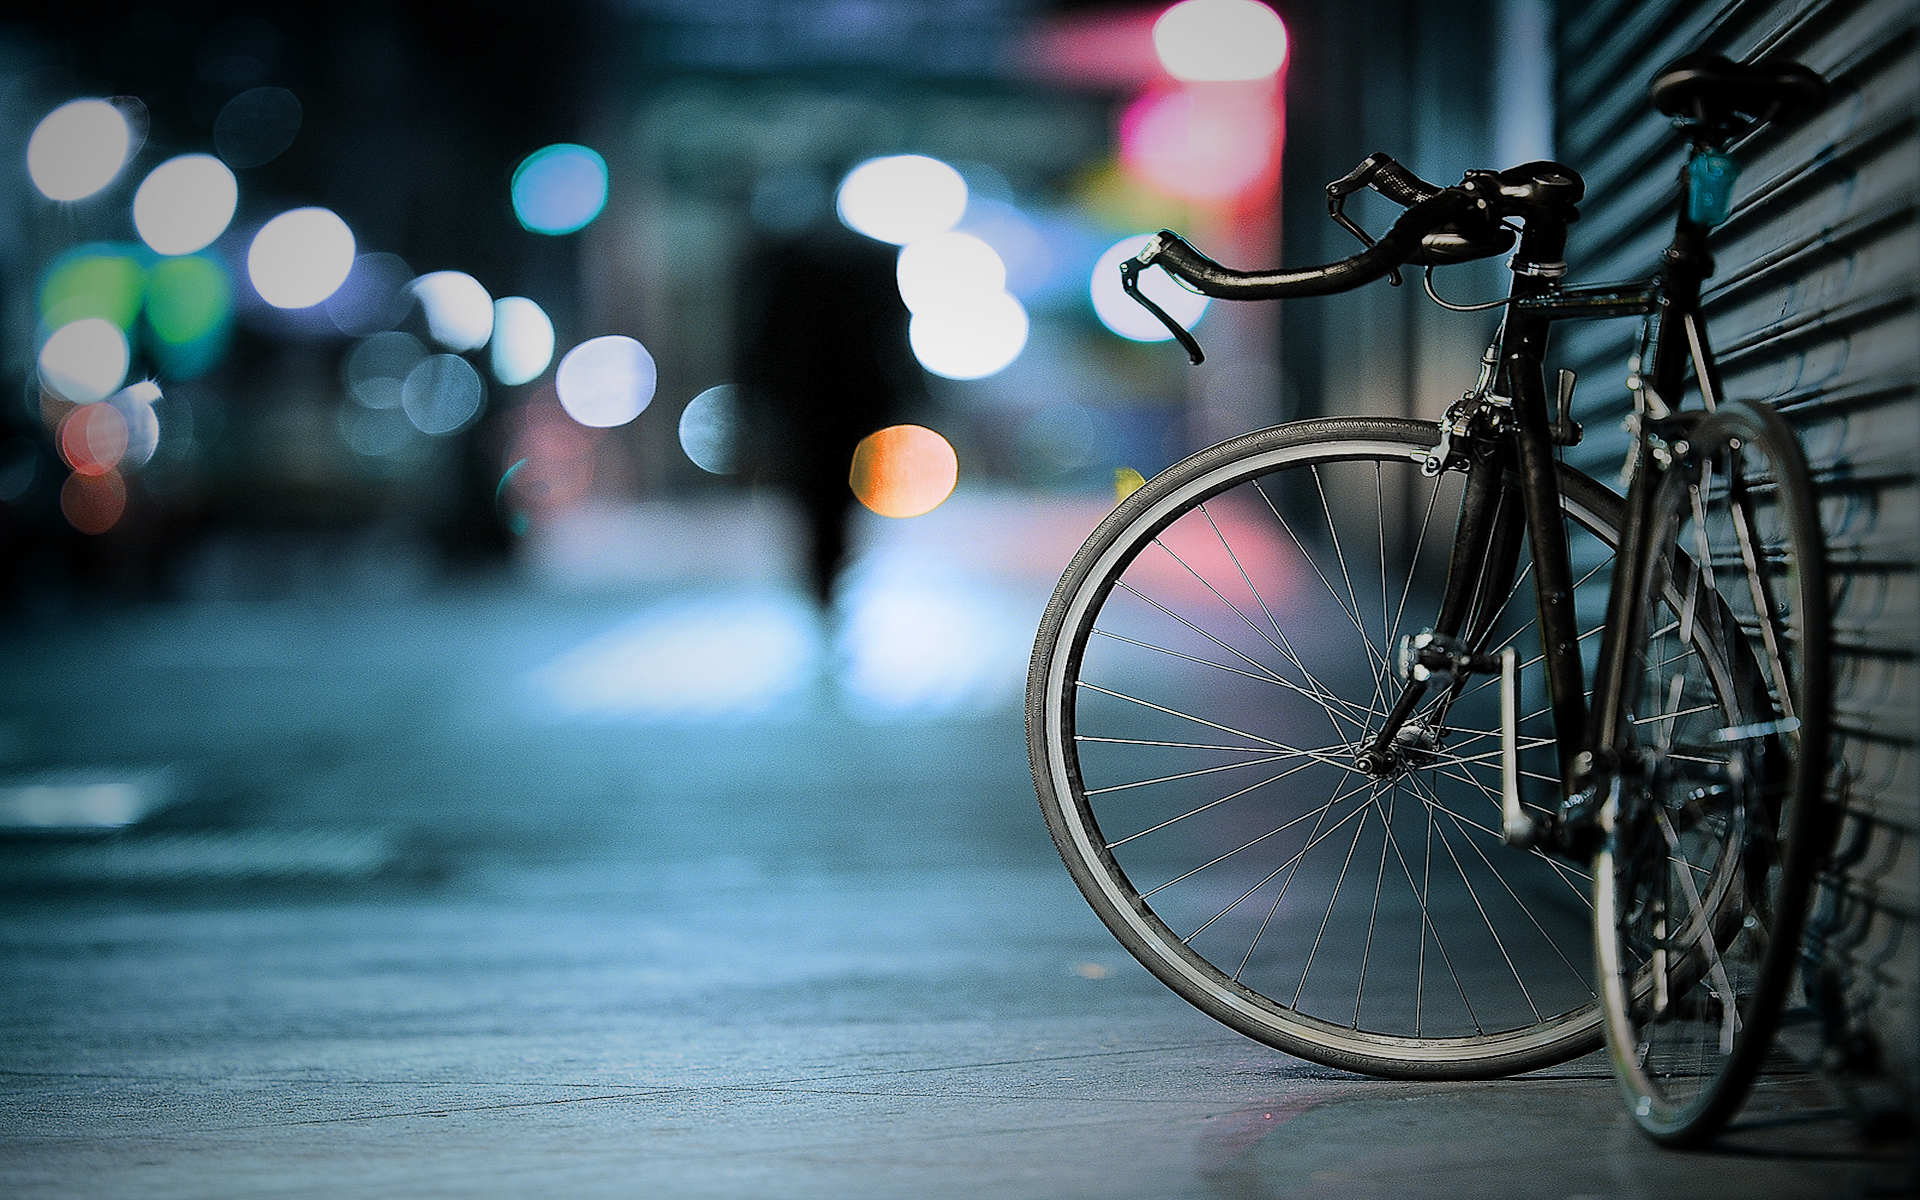 49+] Bicycle Pictures and Wallpapers - WallpaperSafari